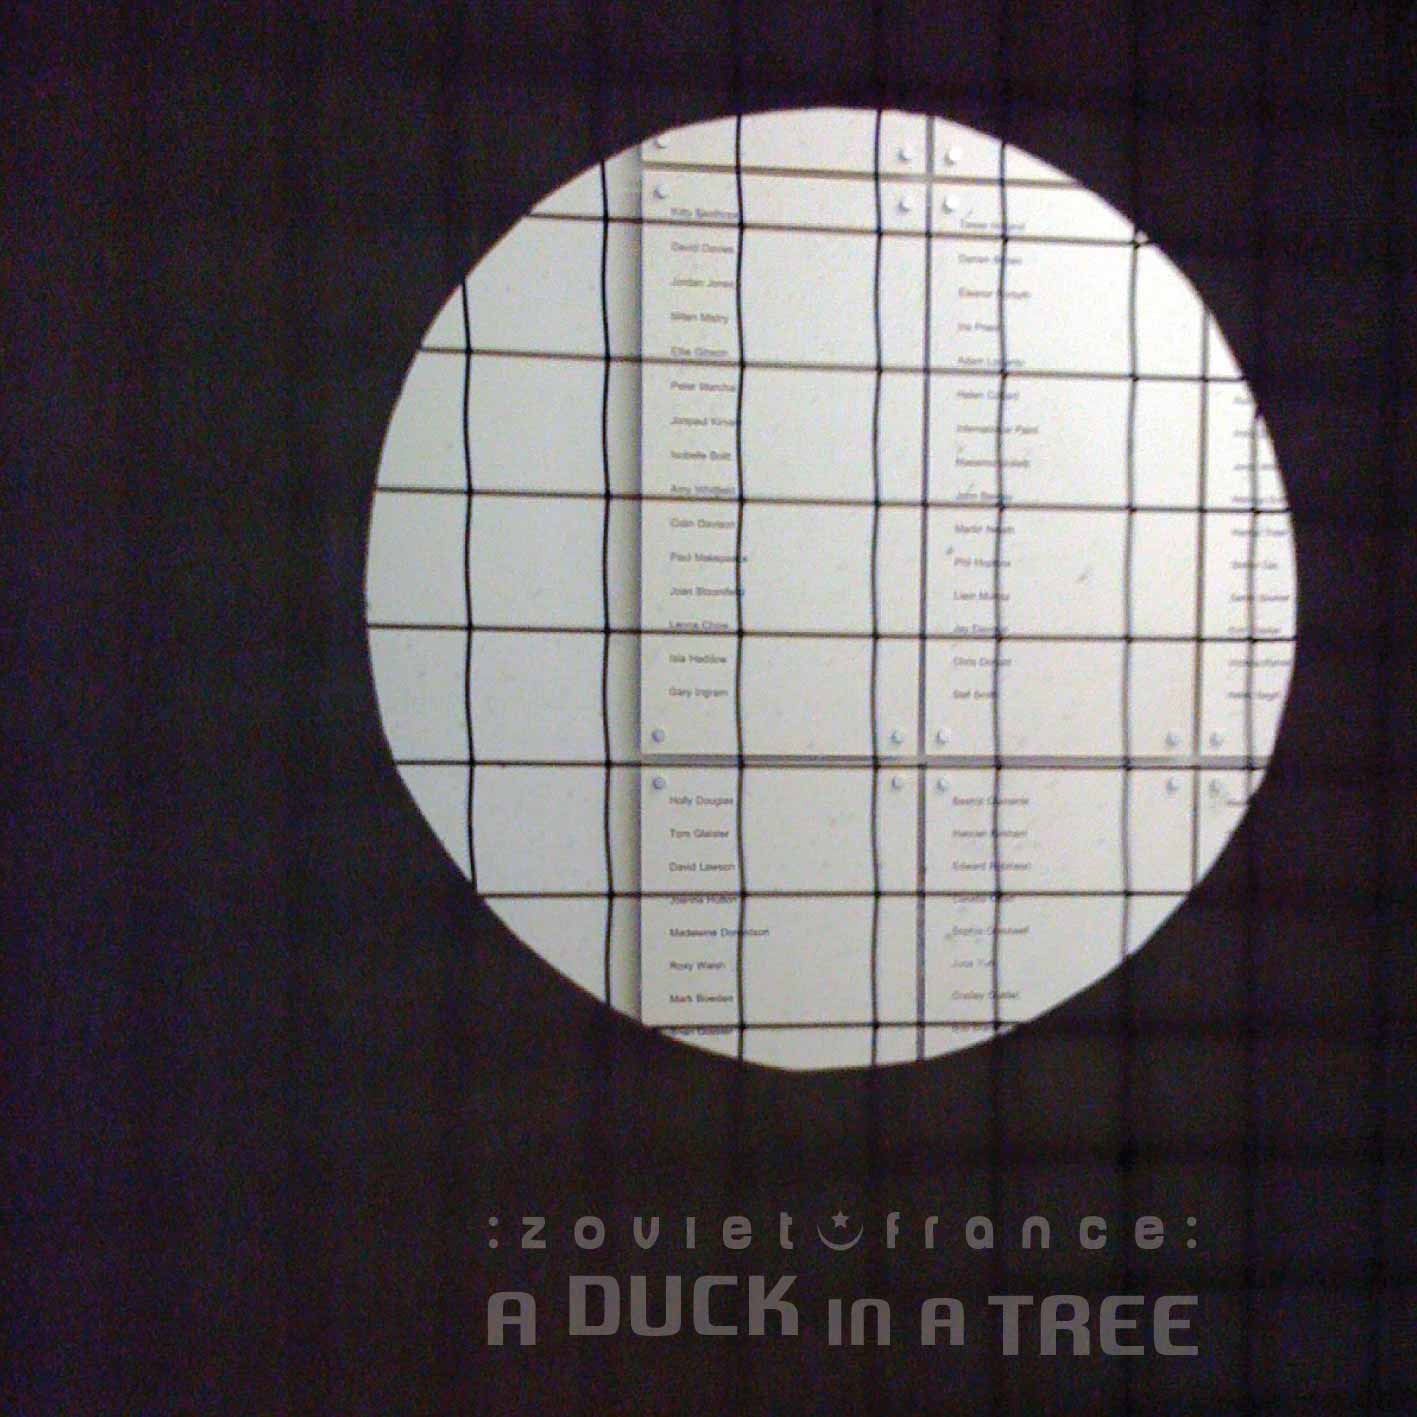 A Duck in a Tree 2014-12-27 | A Bit of a While